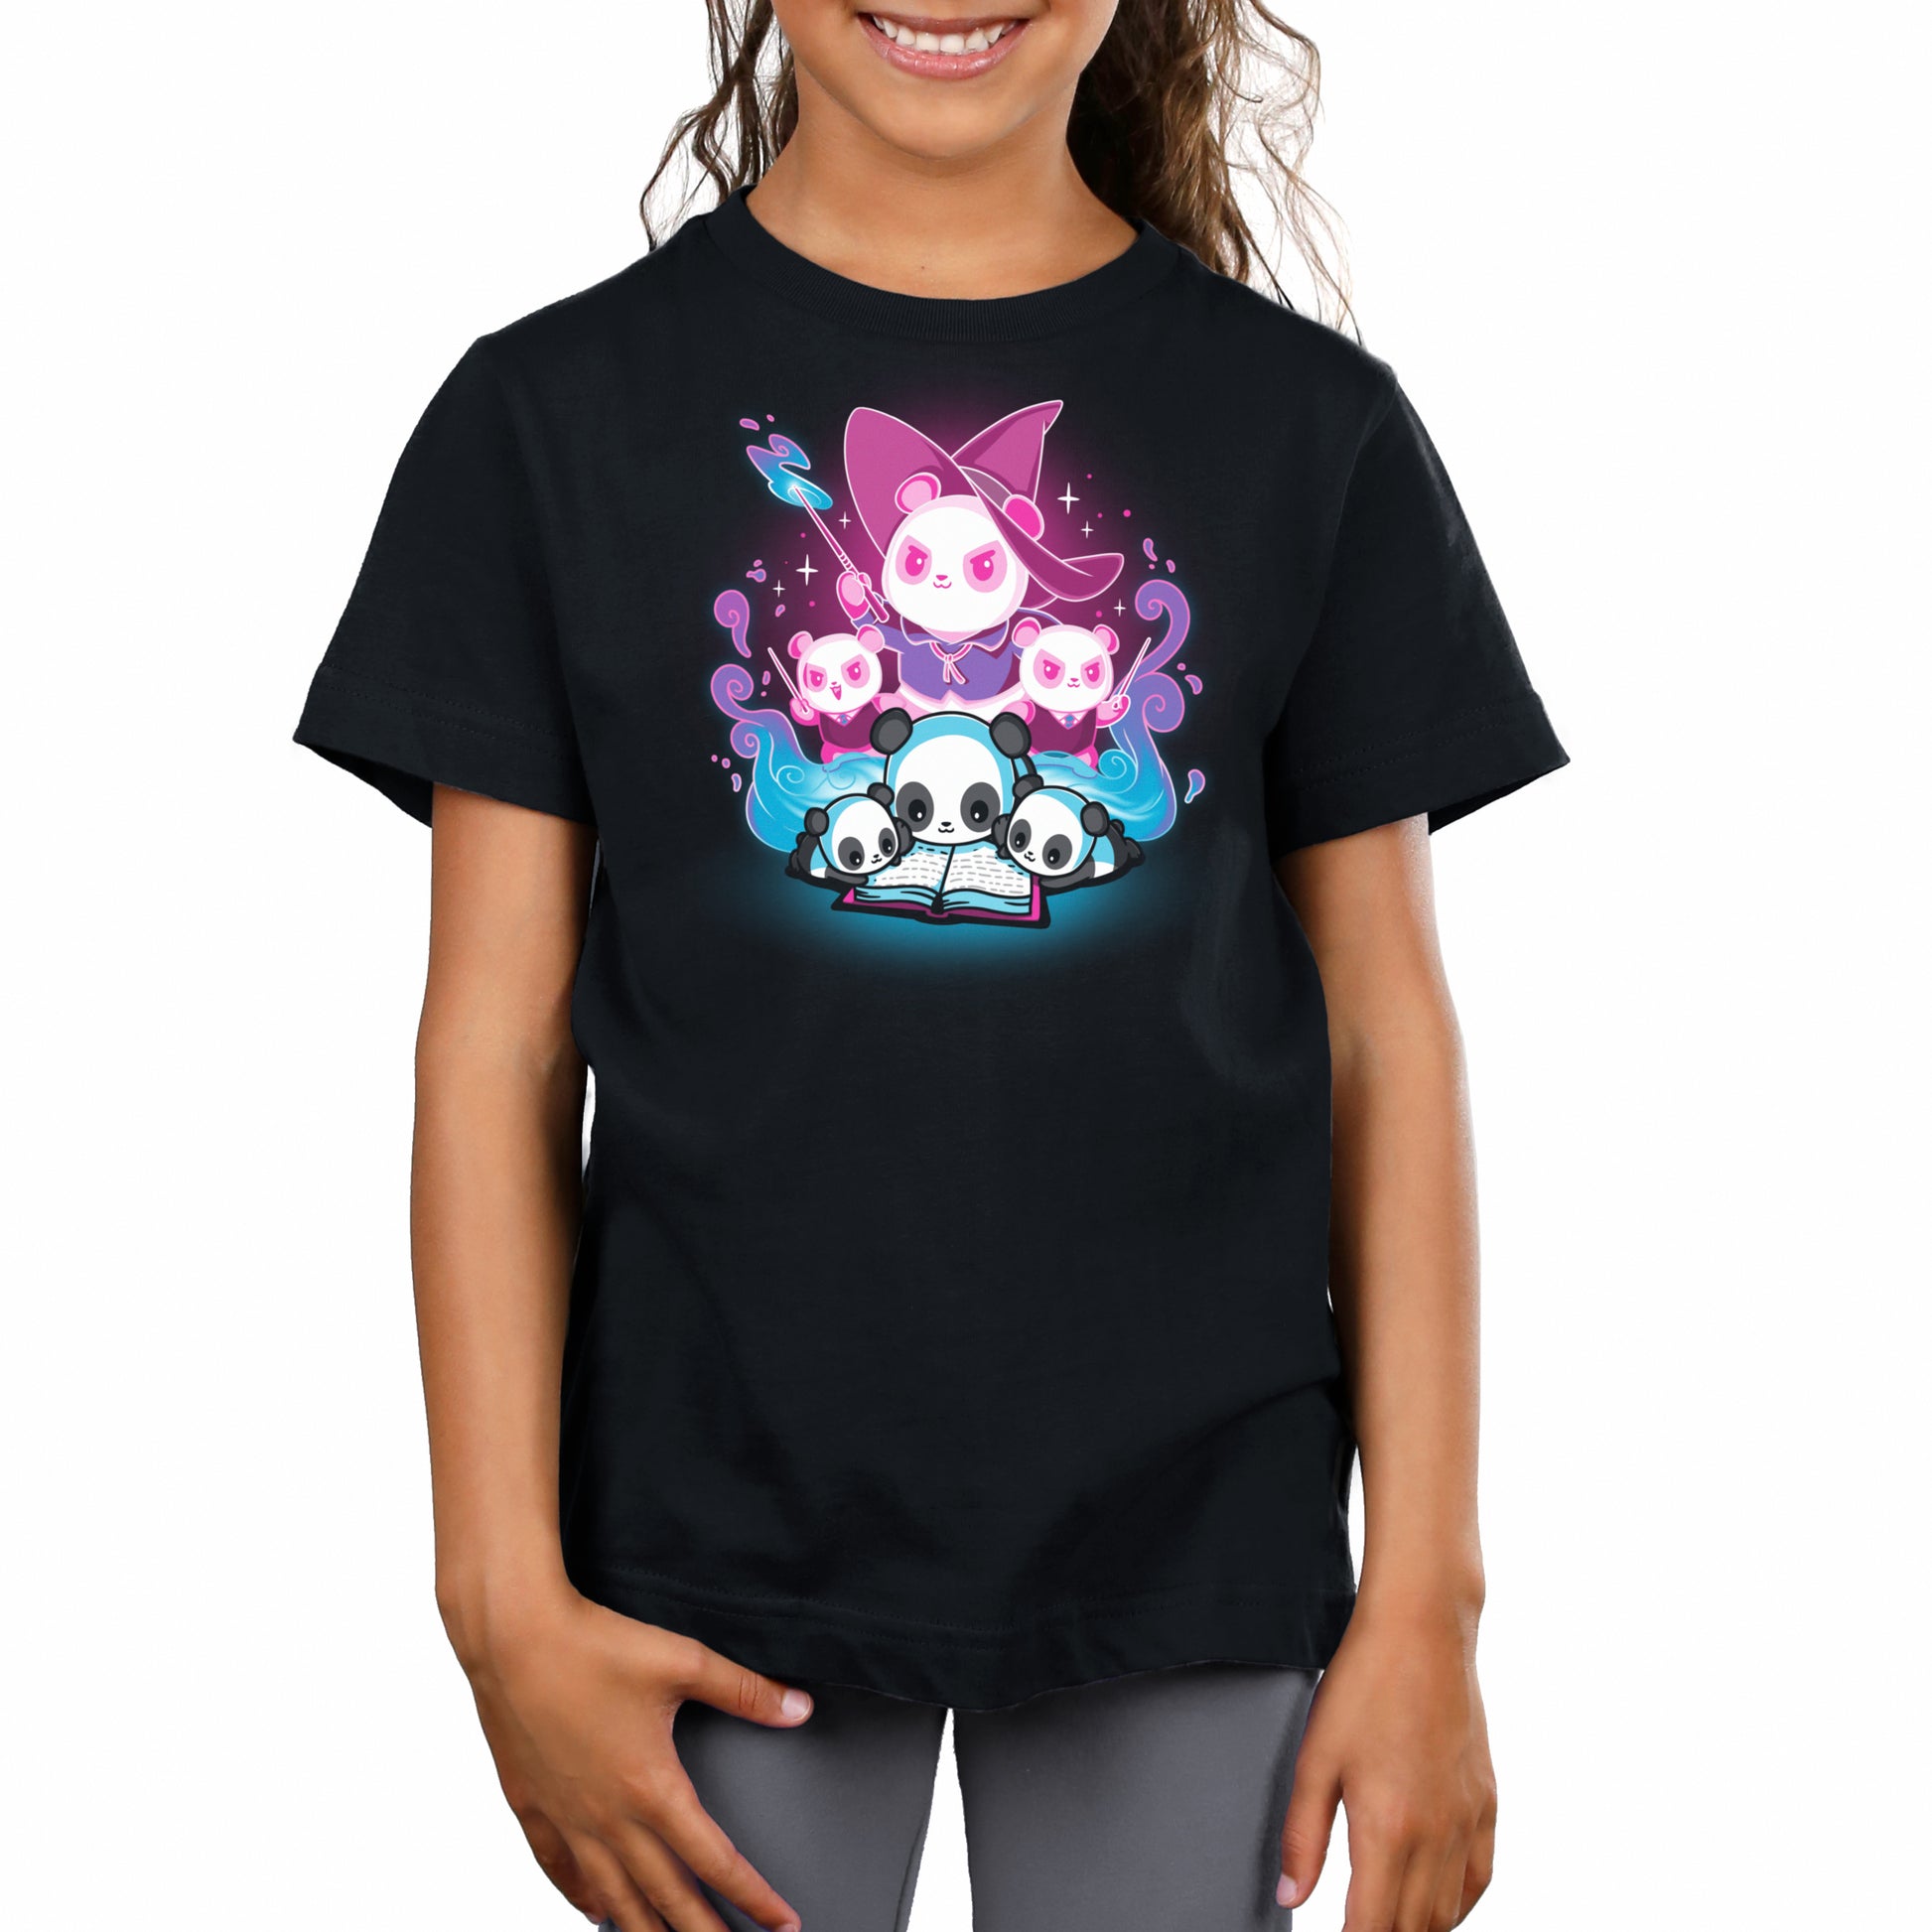 A girl wearing a comfortable Tales of Magic black t-shirt from TeeTurtle.